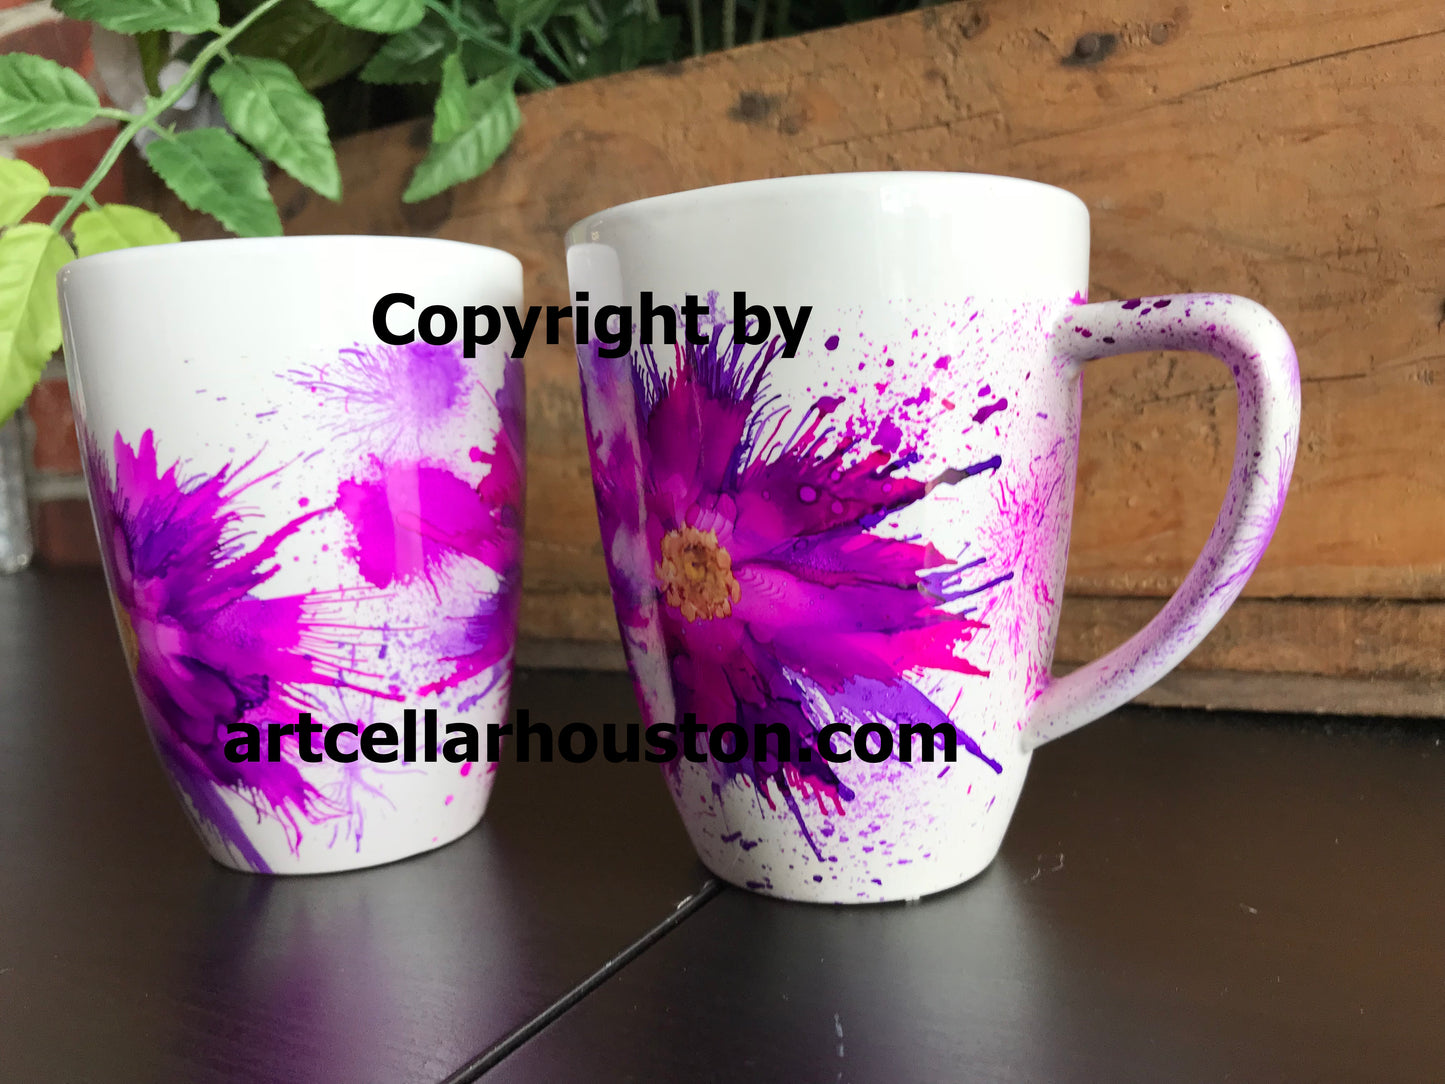 Sat, Jun 11th, 11a-1pm “Painted Mugs & Plates” Private Houston Kids Painting Party